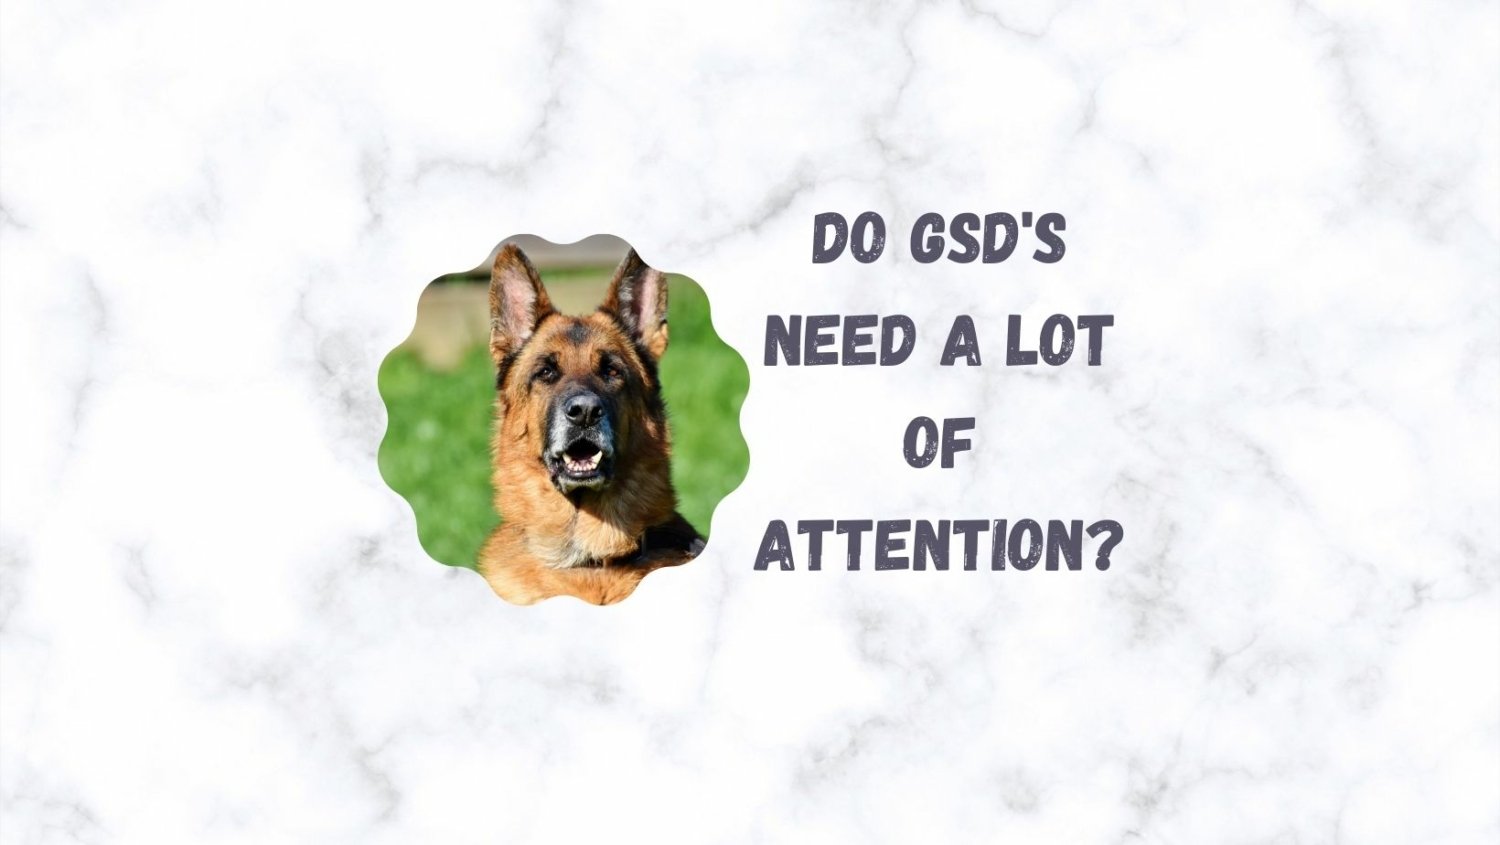 Do German Shepherds Need a Lot of Attention?